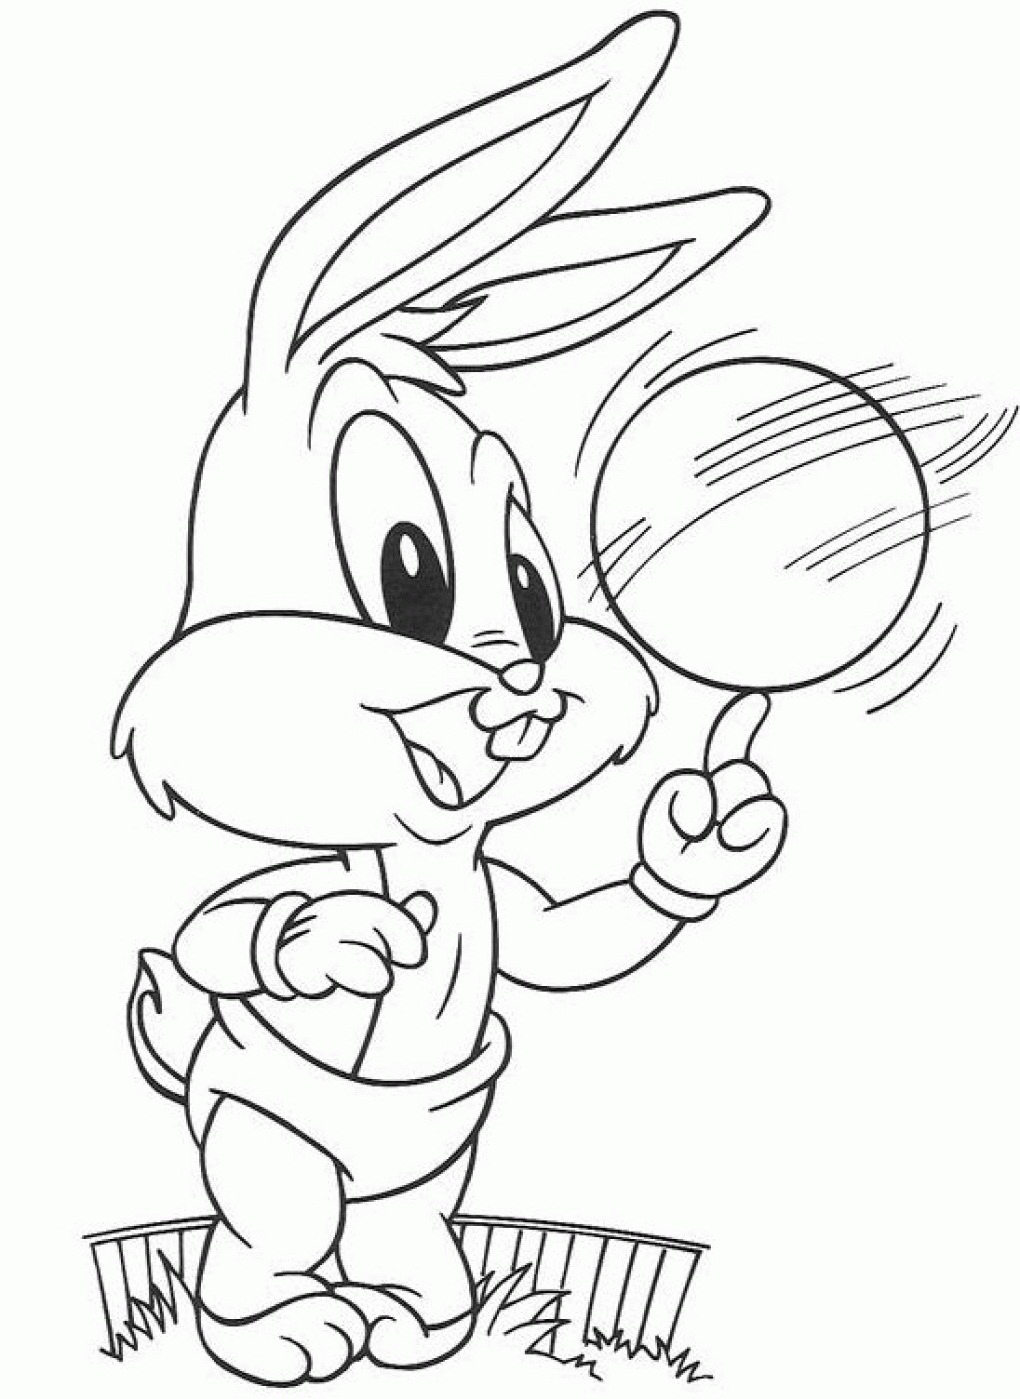 49+ Bunny Coloring Pages Printable